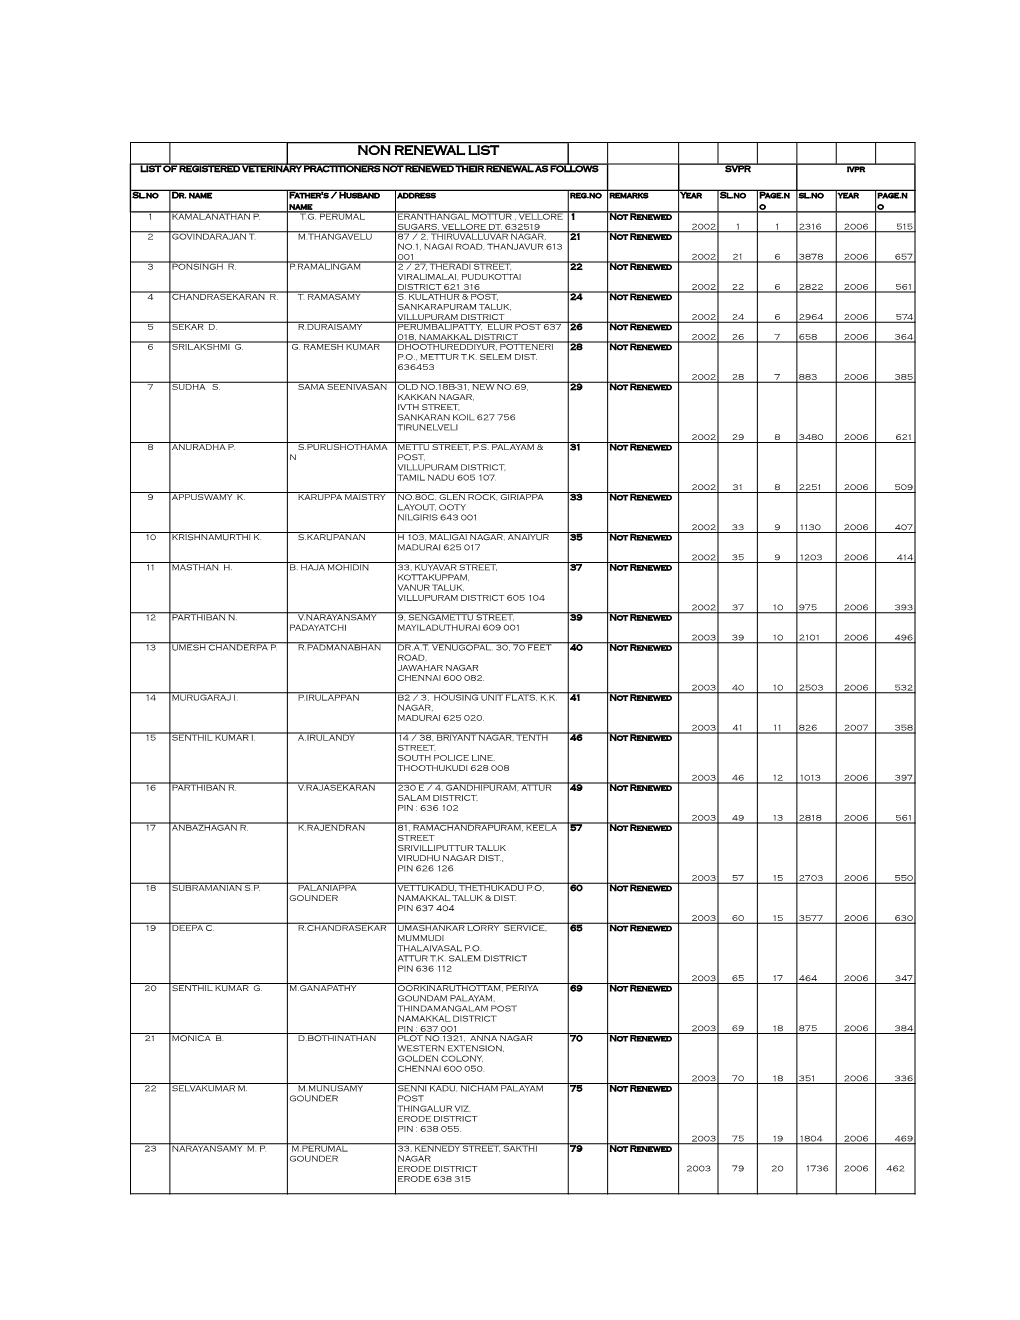 NON RENEWAL LIST LIST of REGISTERED VETERINARY PRACTITIONERS NOT RENEWED THEIR RENEWAL AS FOLLOWS SVPR Ivpr